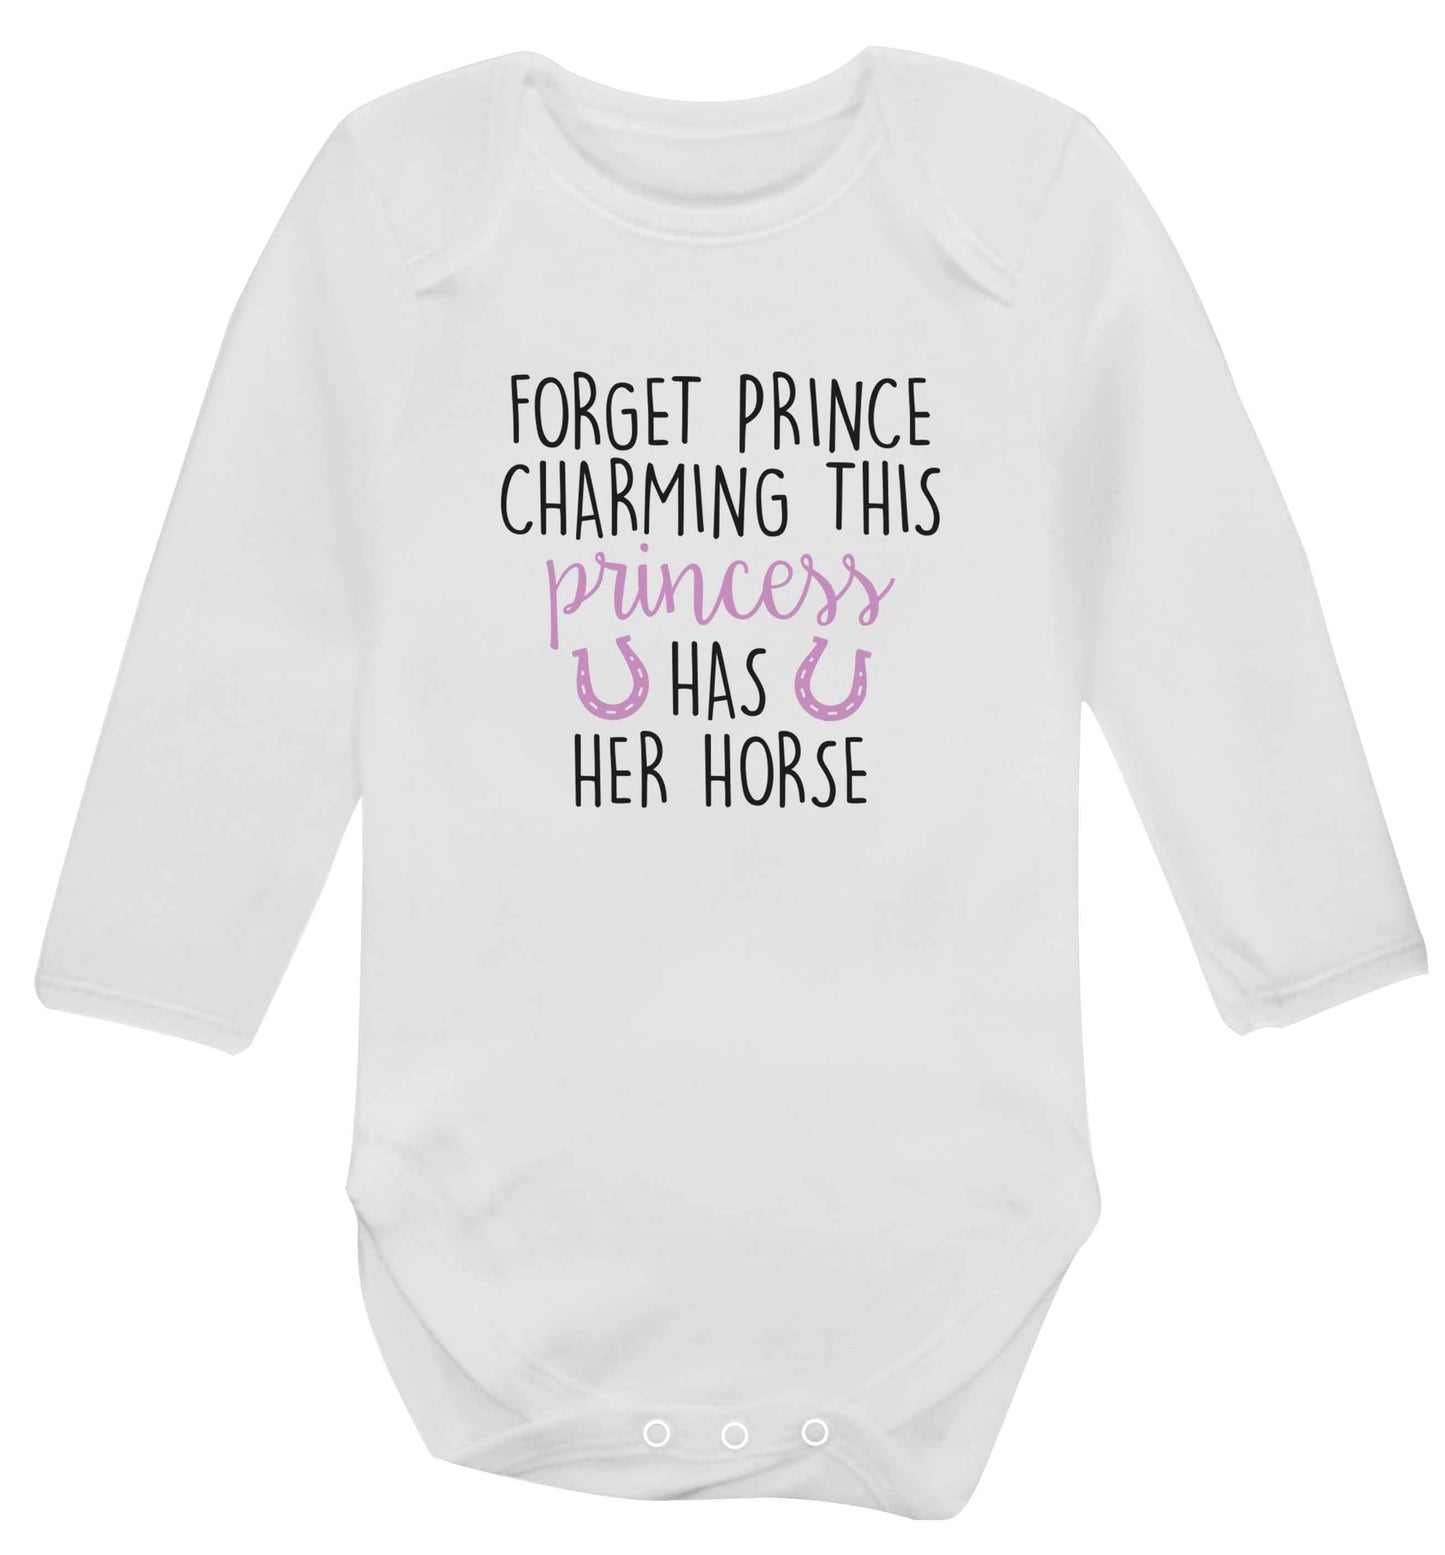 Forget prince charming this princess has her horse baby vest long sleeved white 6-12 months